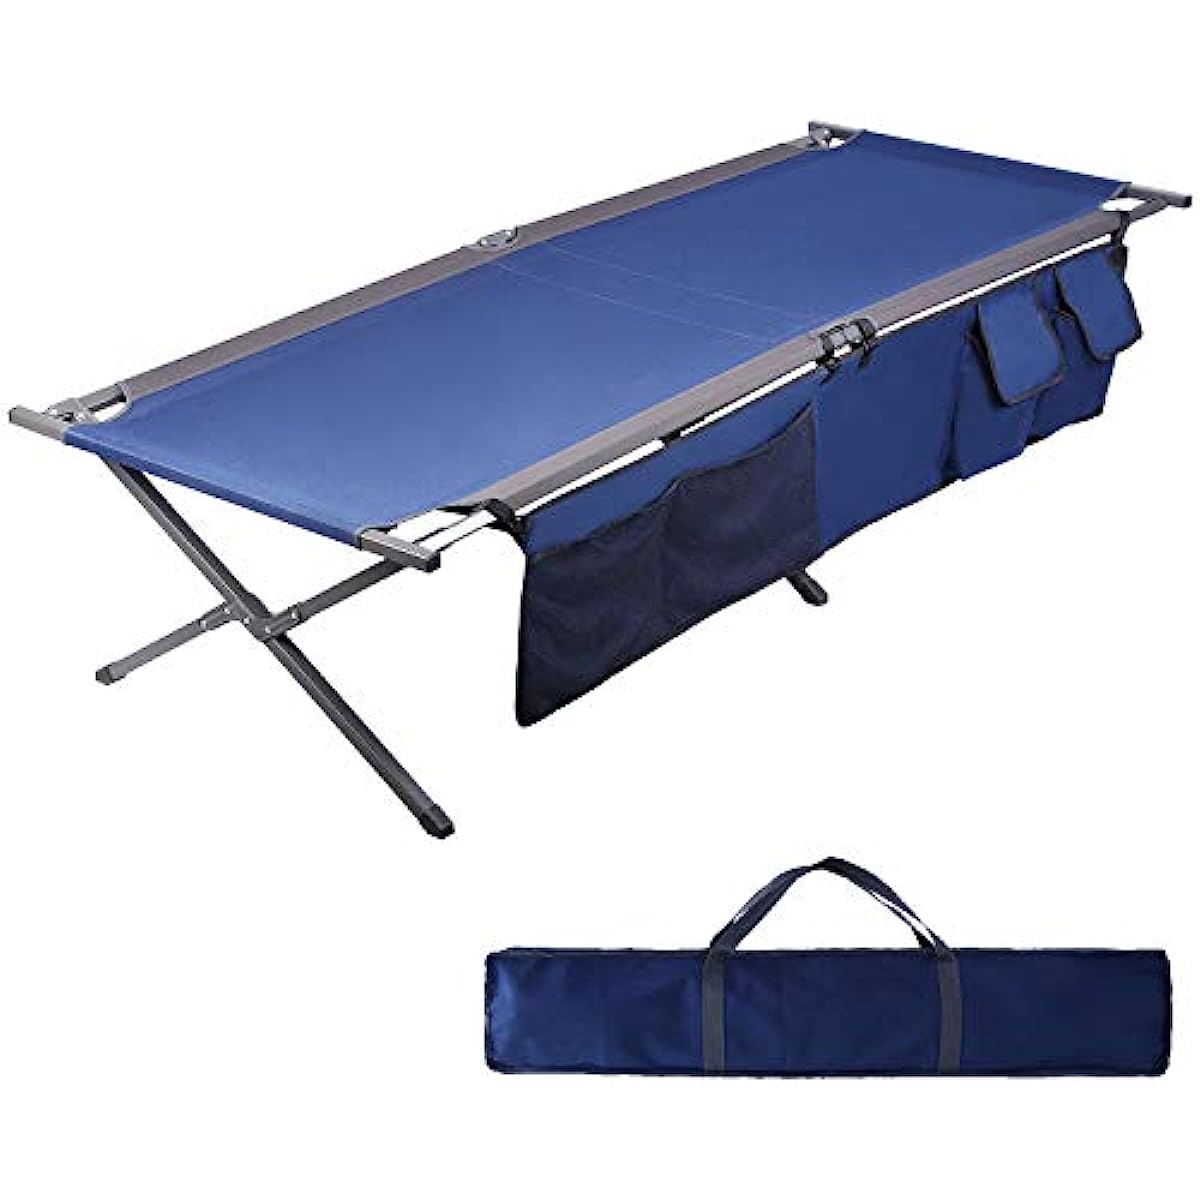 PORTAL Folding Portable Camping Cot 83 XL Pack-Away Tent Sleeping Cot Bed with Side Pockets Carry Bag and Side Pockets Included